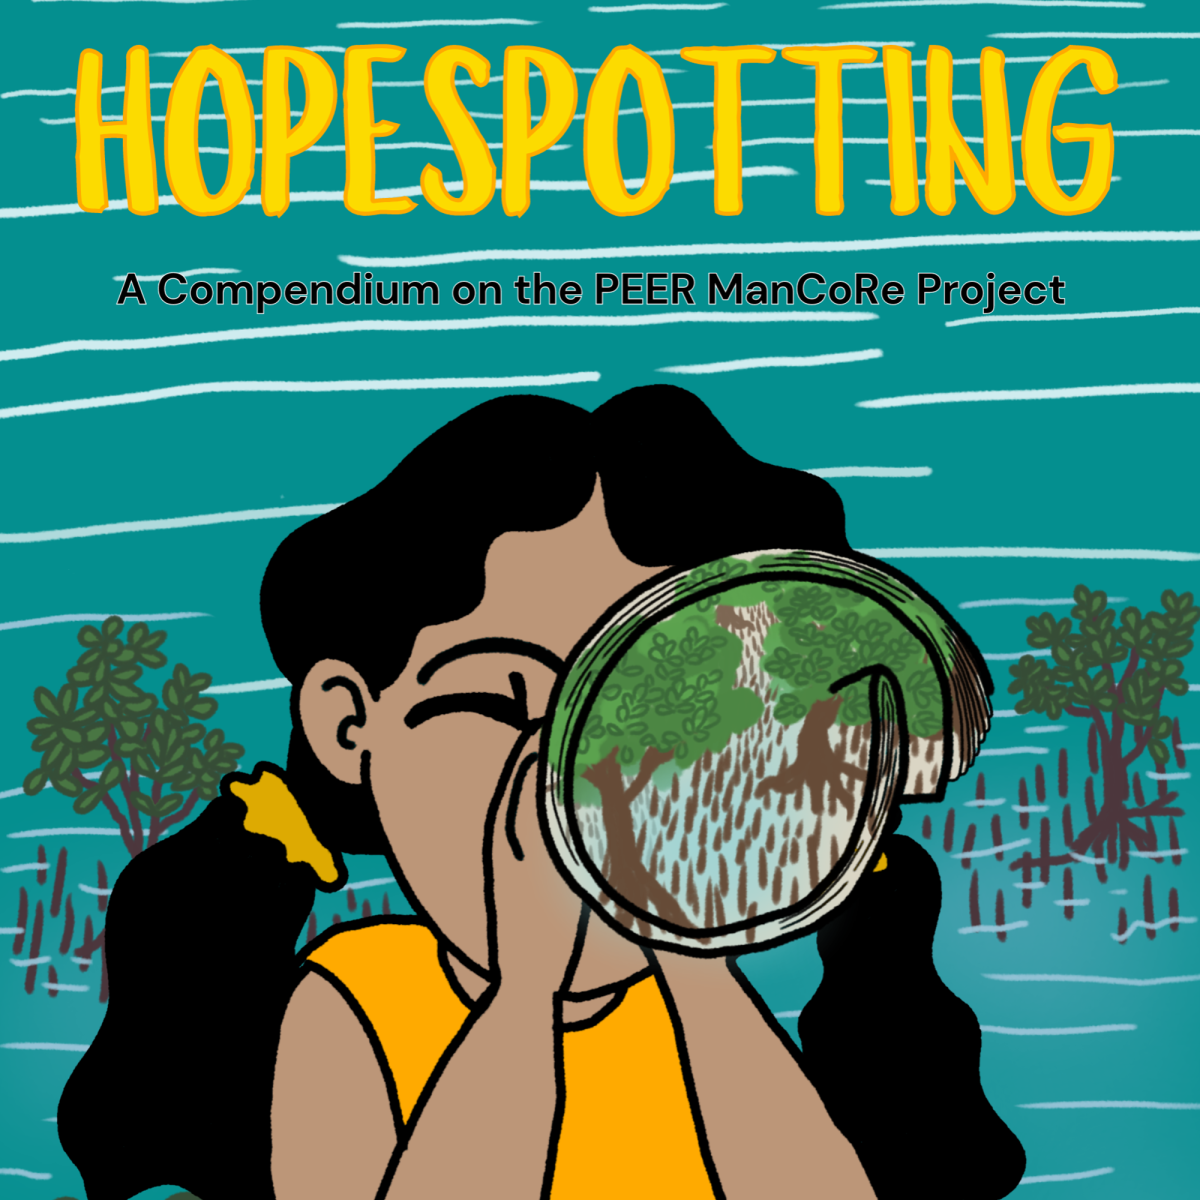 Hopespotting: A Compendium on the PEER ManCoRe Project